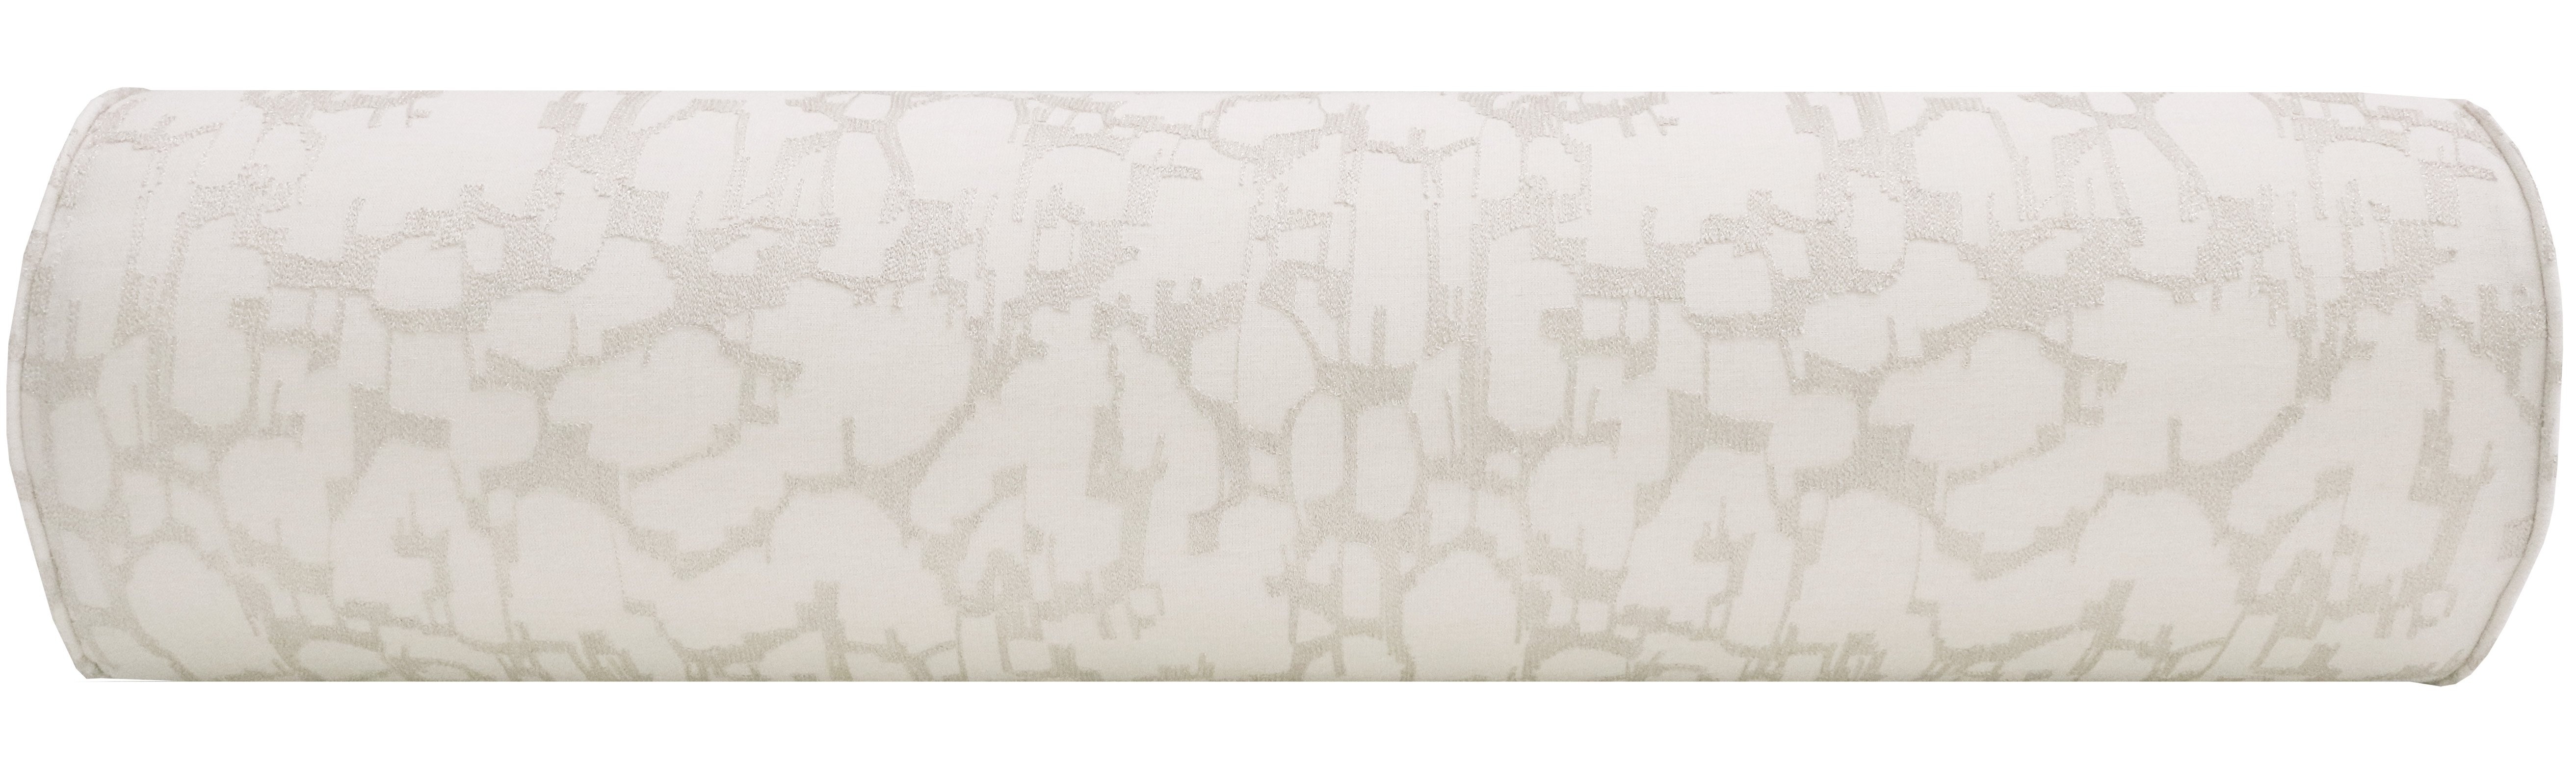 THE BOLSTER :: PASTICHE LINEN // ALABASTER - KING // 9" X 48" - Image 1